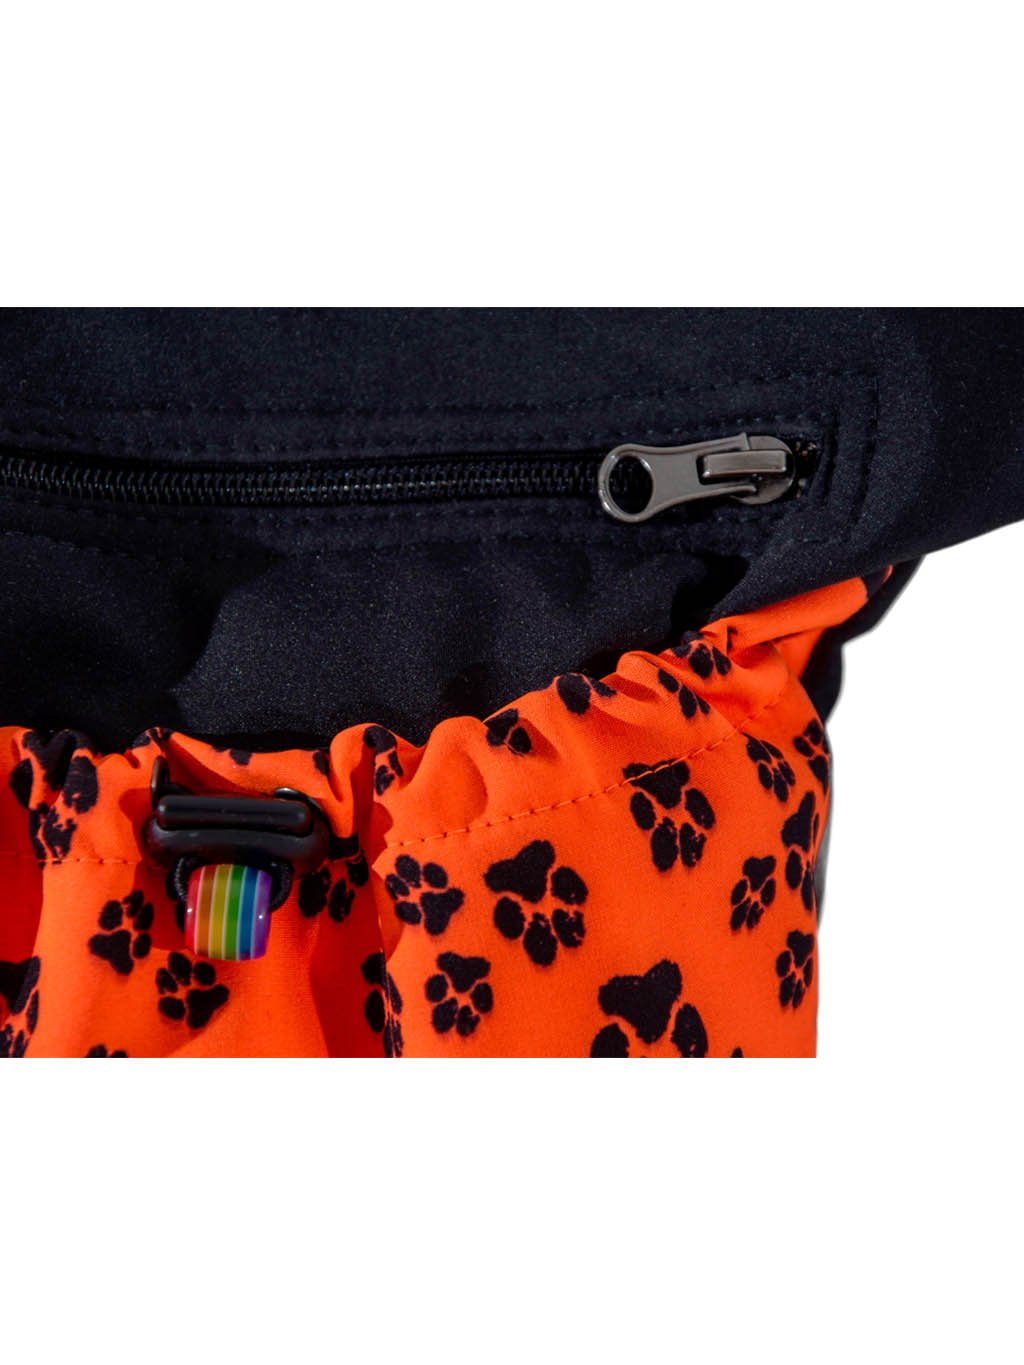 Treat bag 2in1 neon orange with paws 4dox